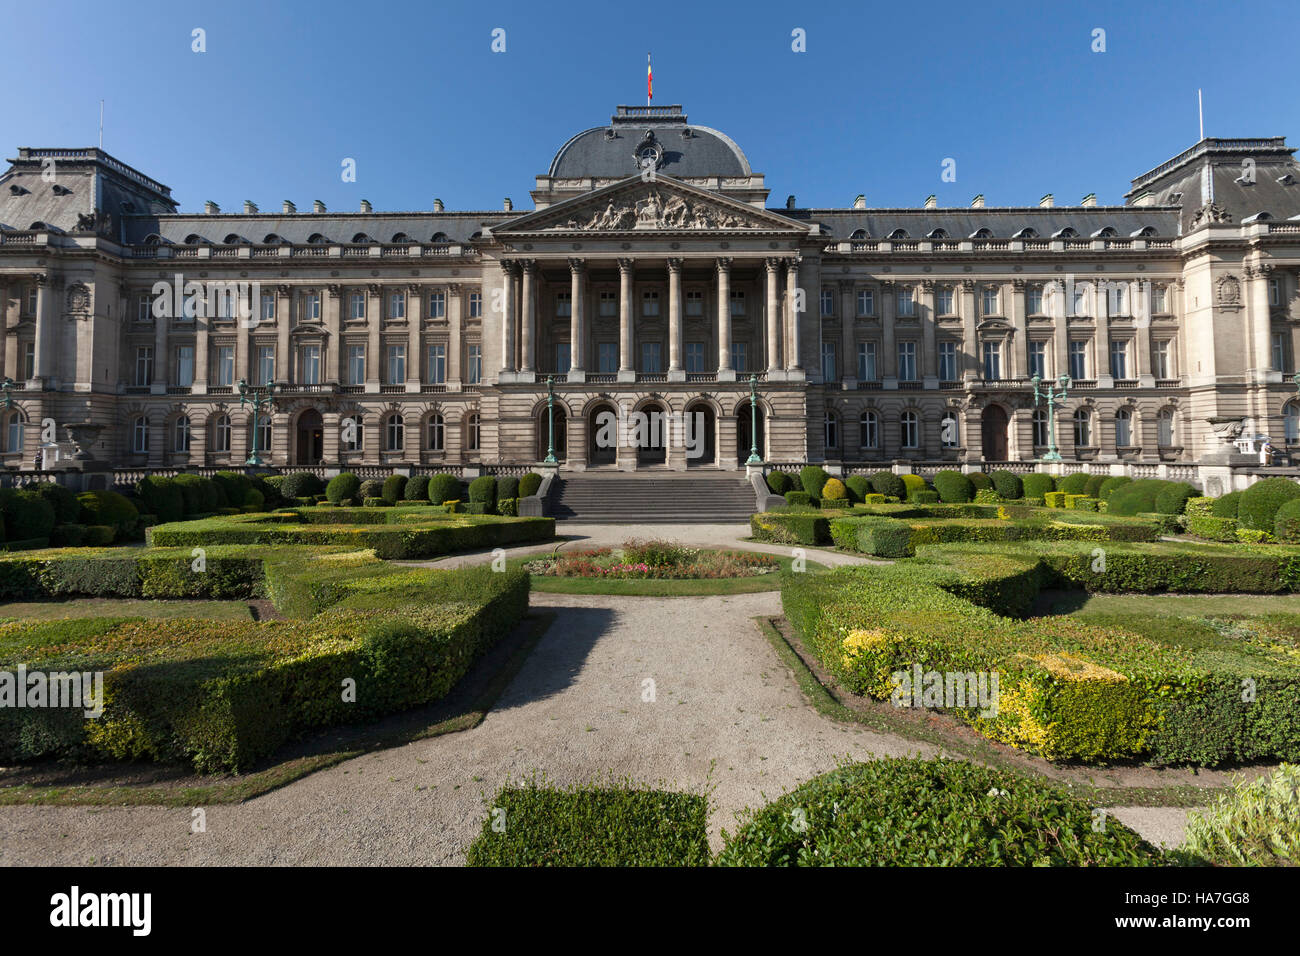 Belgium, Brussels: the Grand Palace Stock Photo